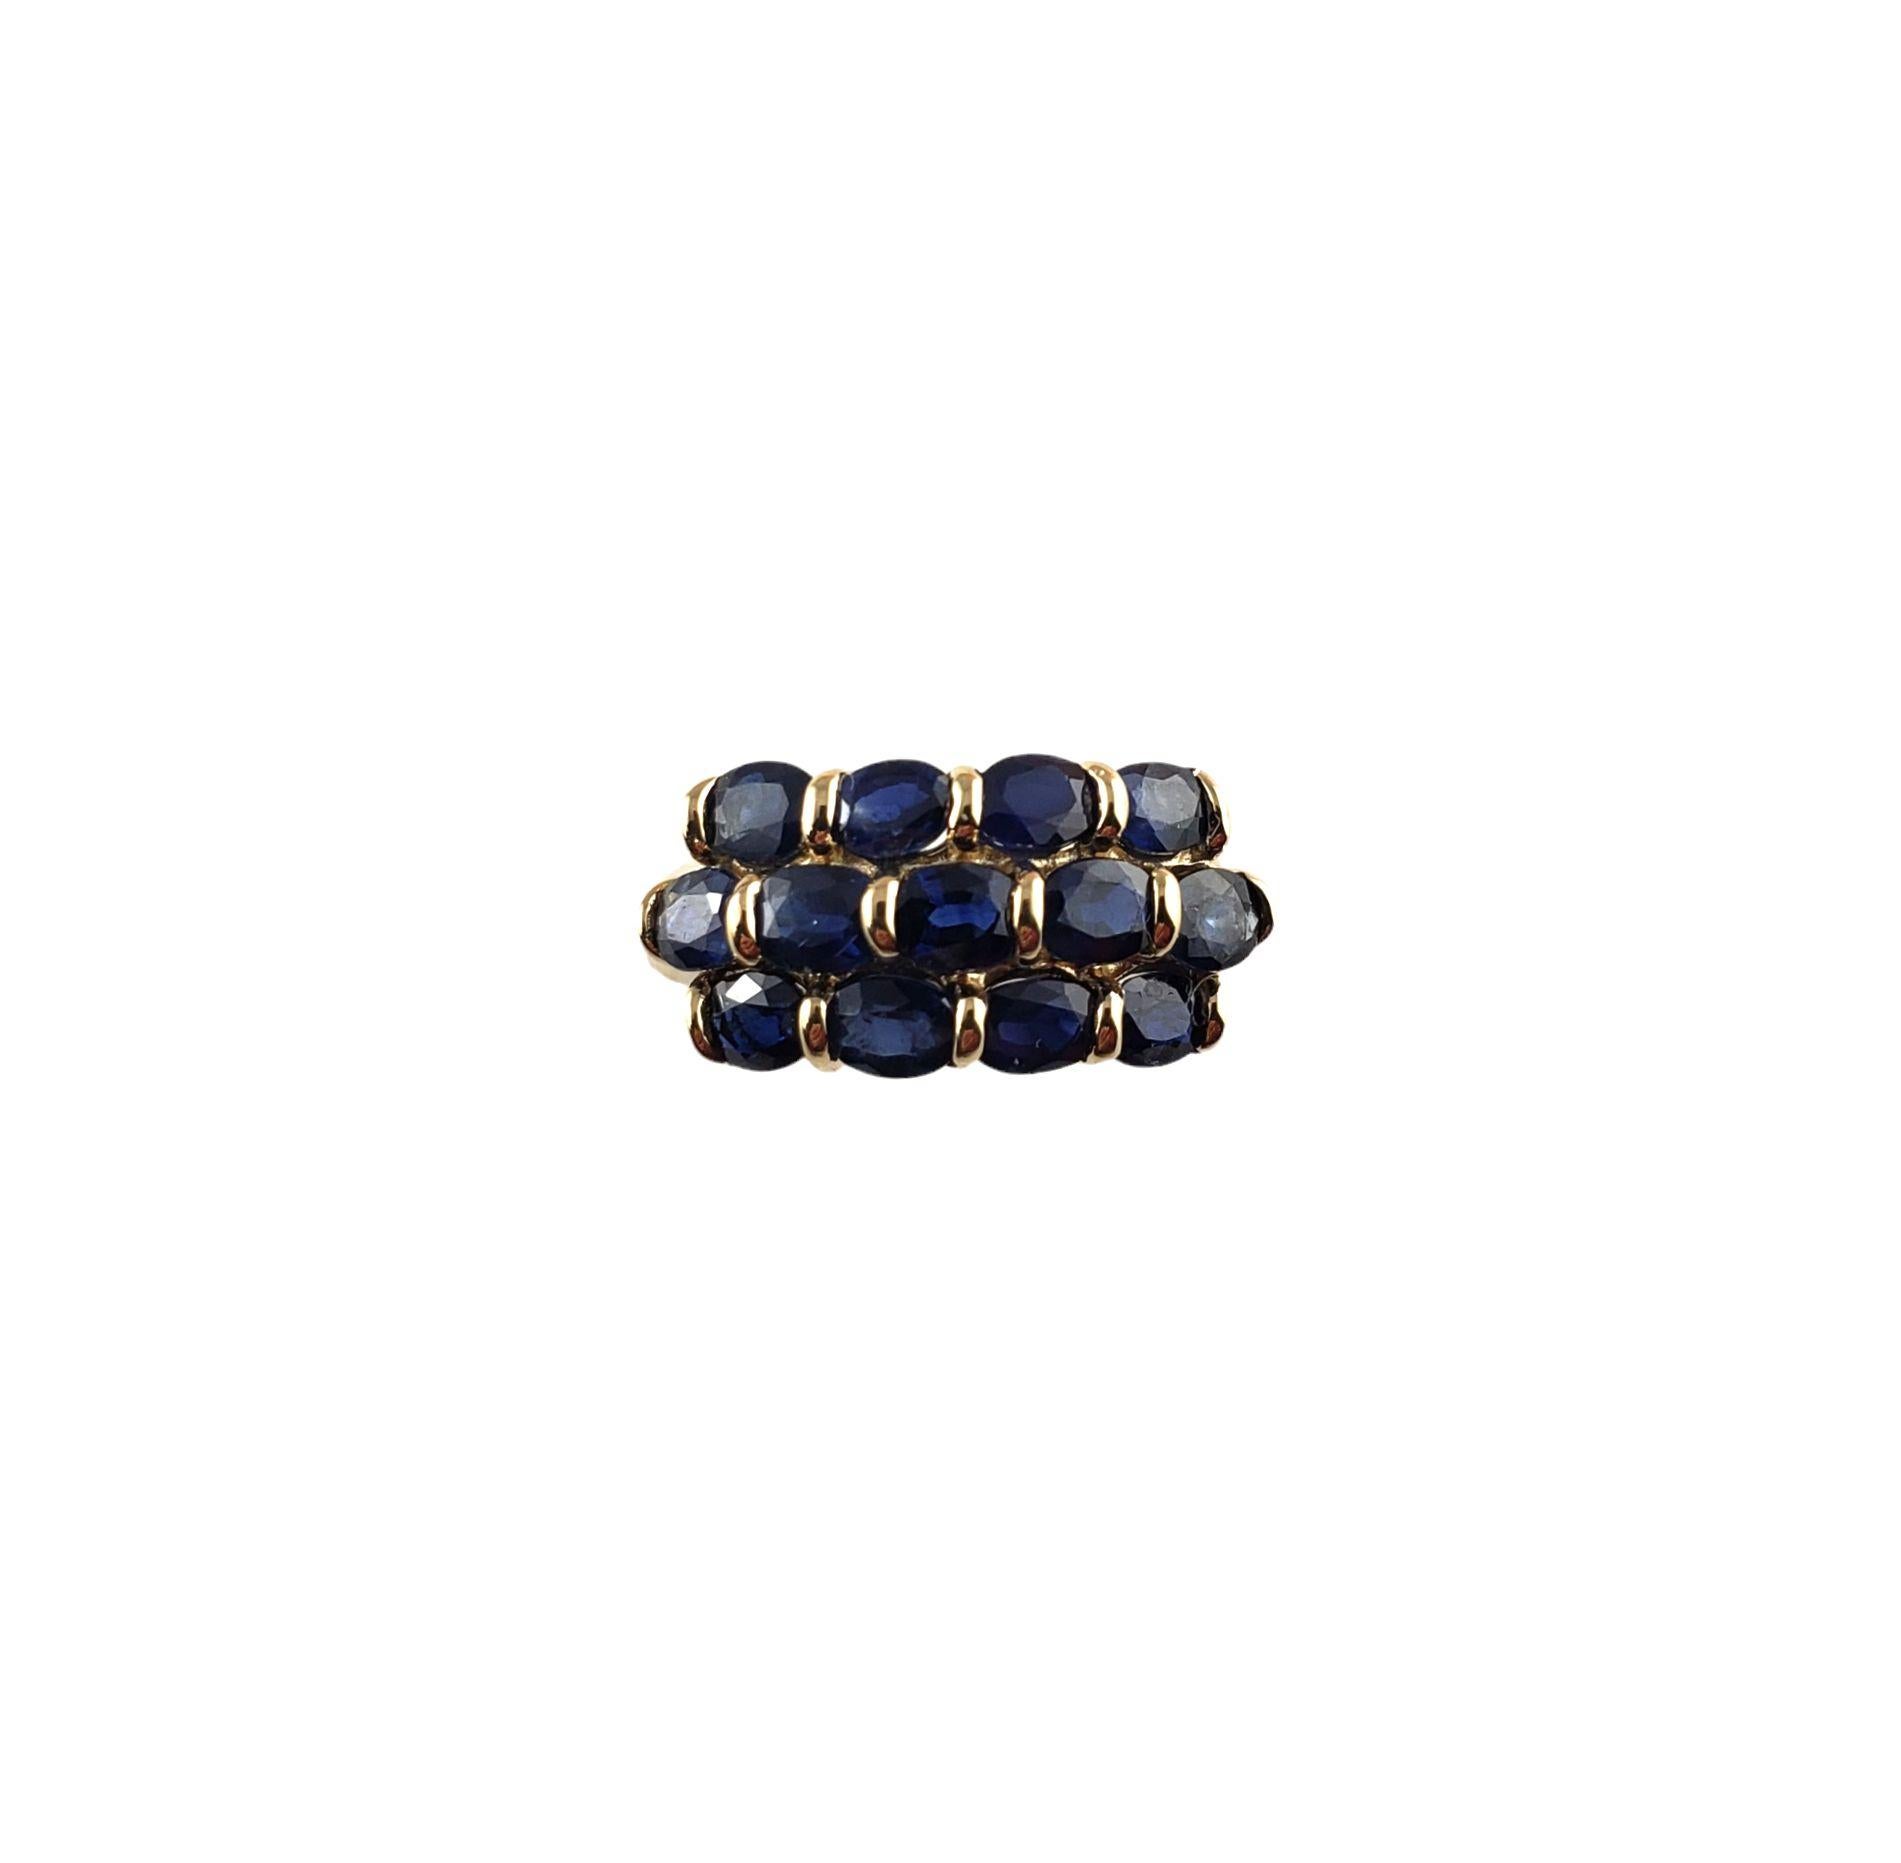 Vintage 14 Karat Yellow Gold and Sapphire Ring Size 8-

This stunning ring features 13 oval sapphires (4 mm x 3 mm) set in beautifully detailed 14K yellow gold. Width: 9 mm. Shank: 2 mm.

Ring Size: 8

Weight: 2.5 dwt. / 4.0 gr.

Stamped: 14K

Very